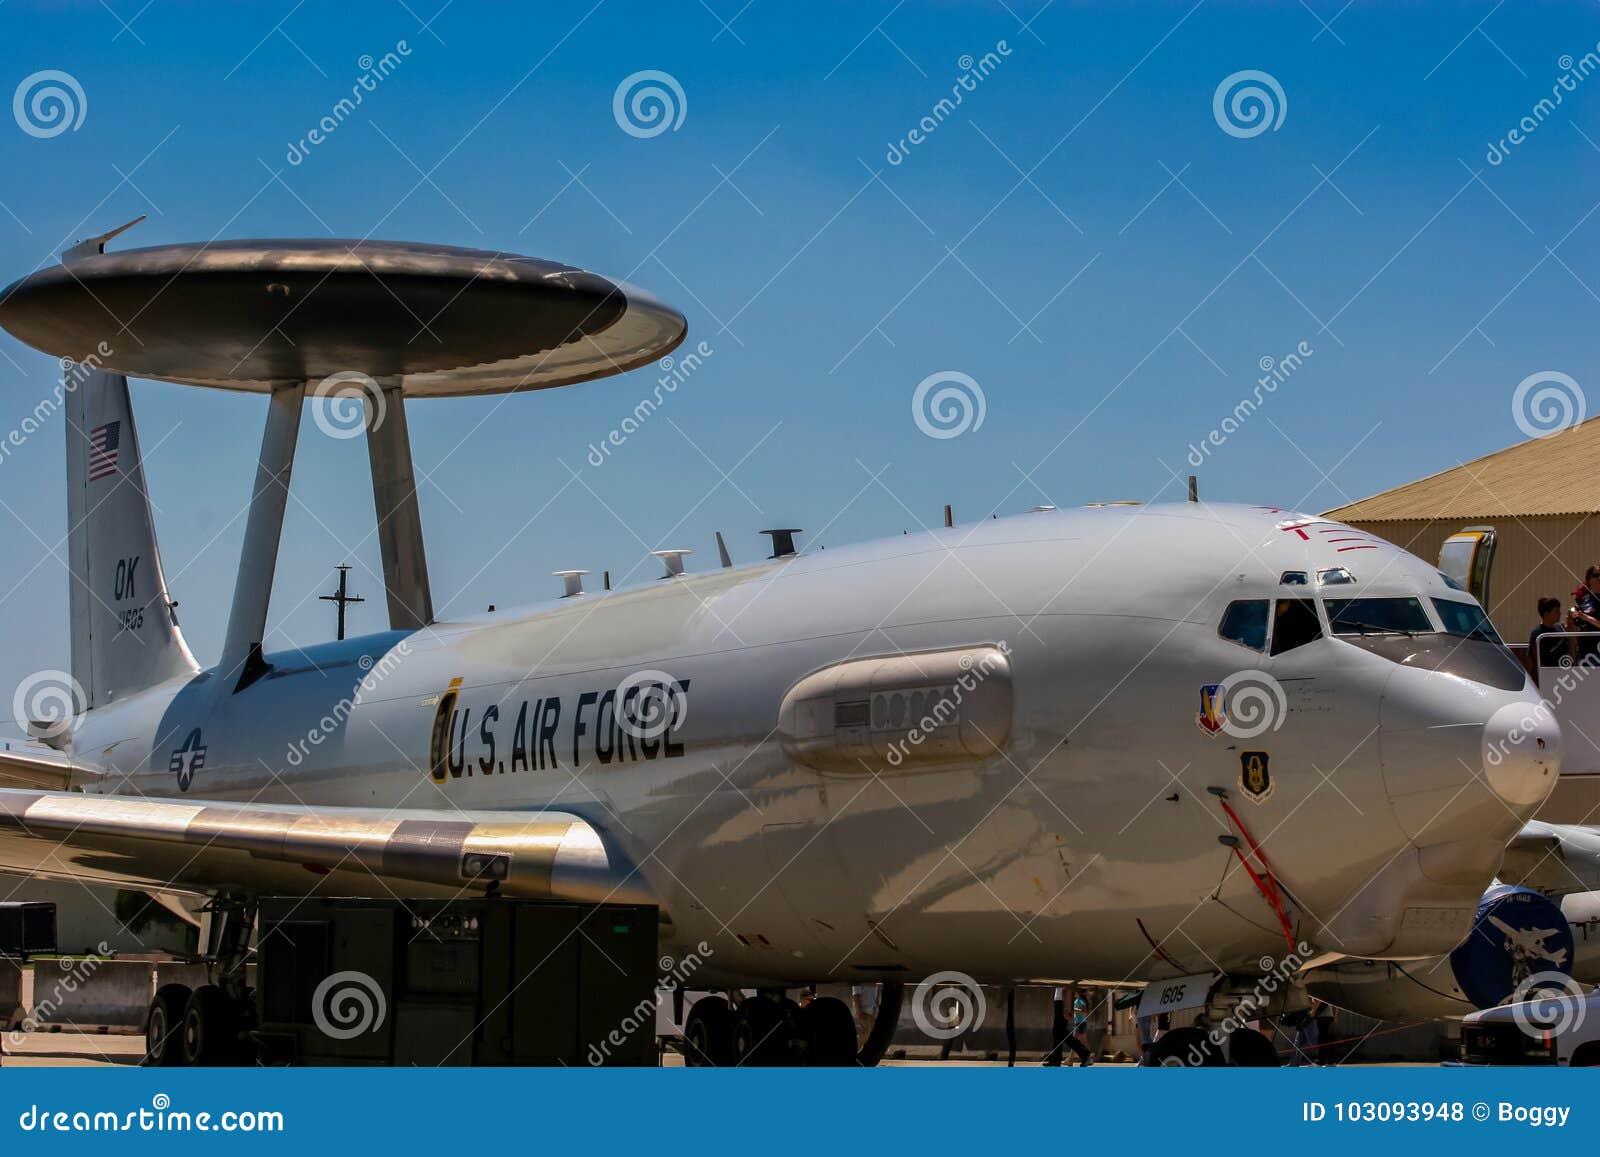 Boeing E 3 Sentry Awacs Early Warning And Control Aircraft Editorial Stock Photo Image Of Force Army